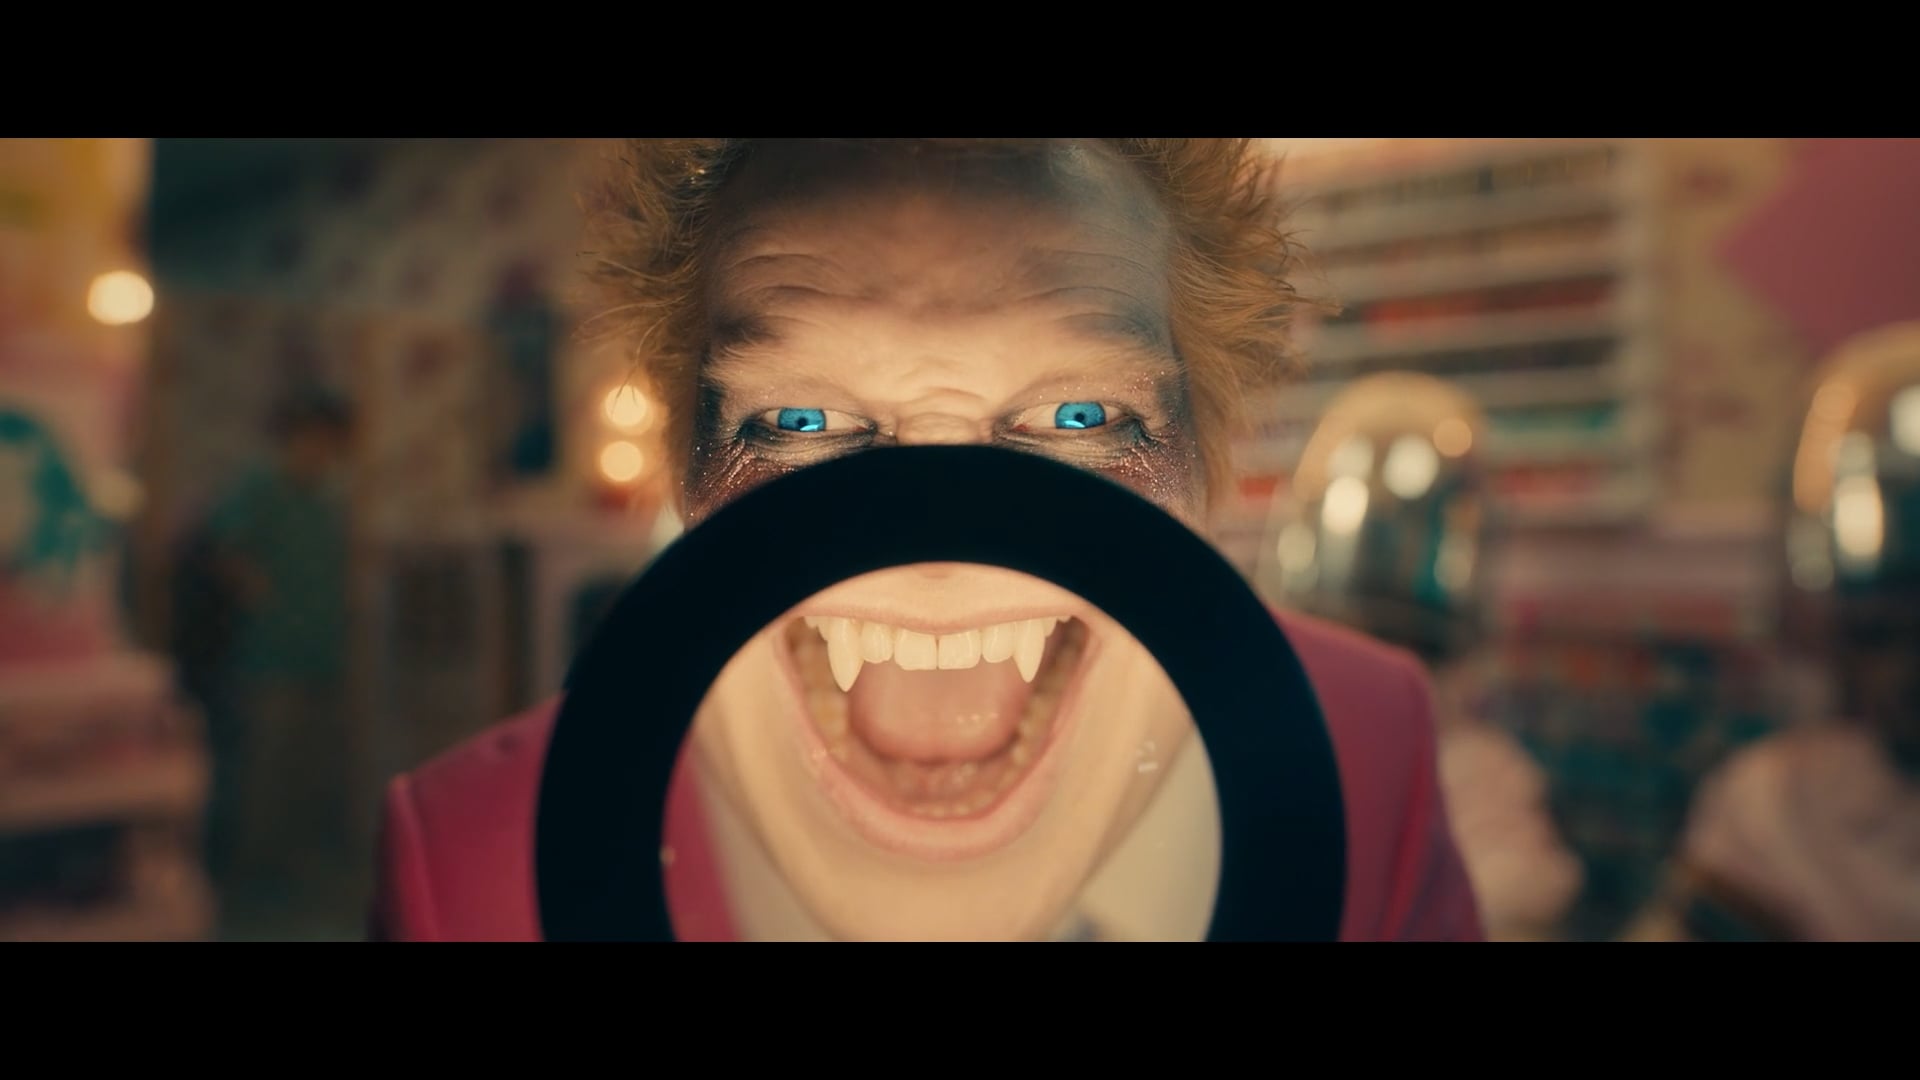 Ed Sheeran 'Bad Habits' directed by Dave Meyers and Line Produced for Freenjoy at Somesuch